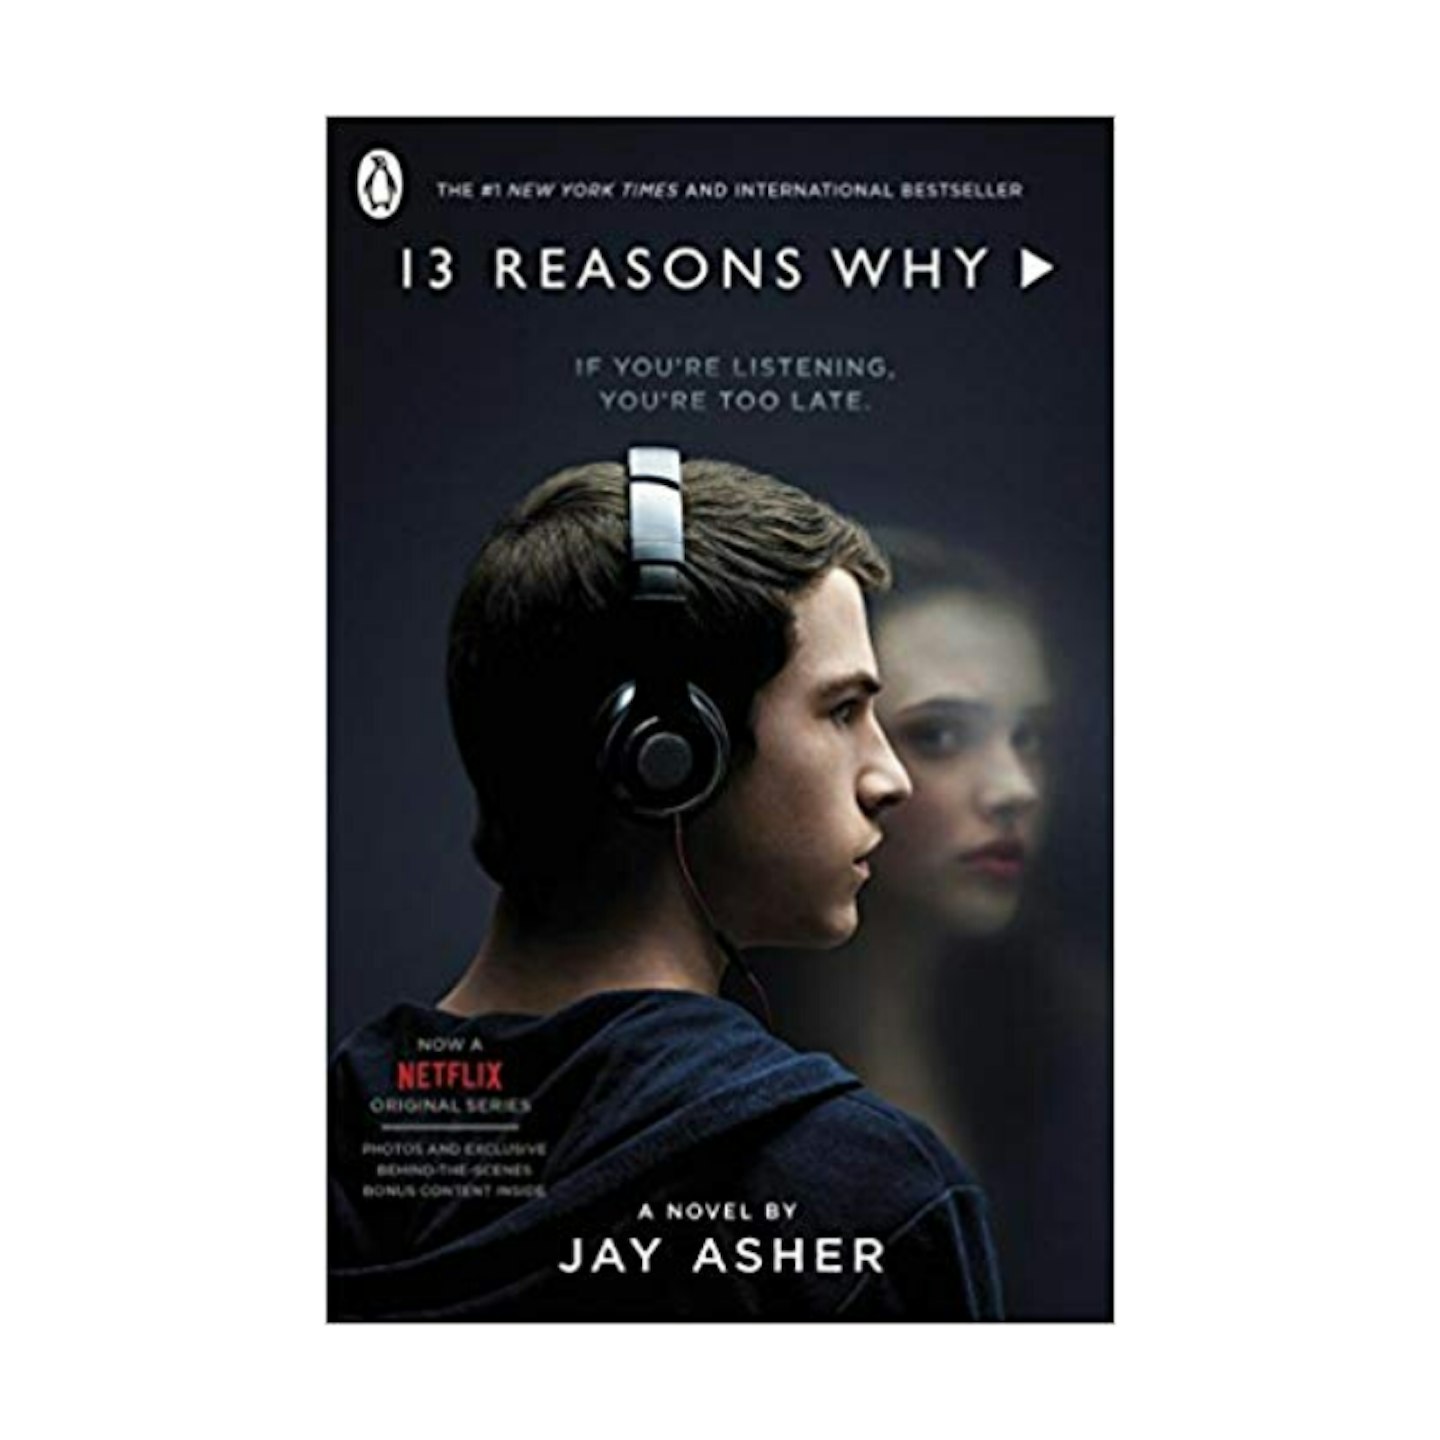 Th1rteen R3asons Why, Jay Asher